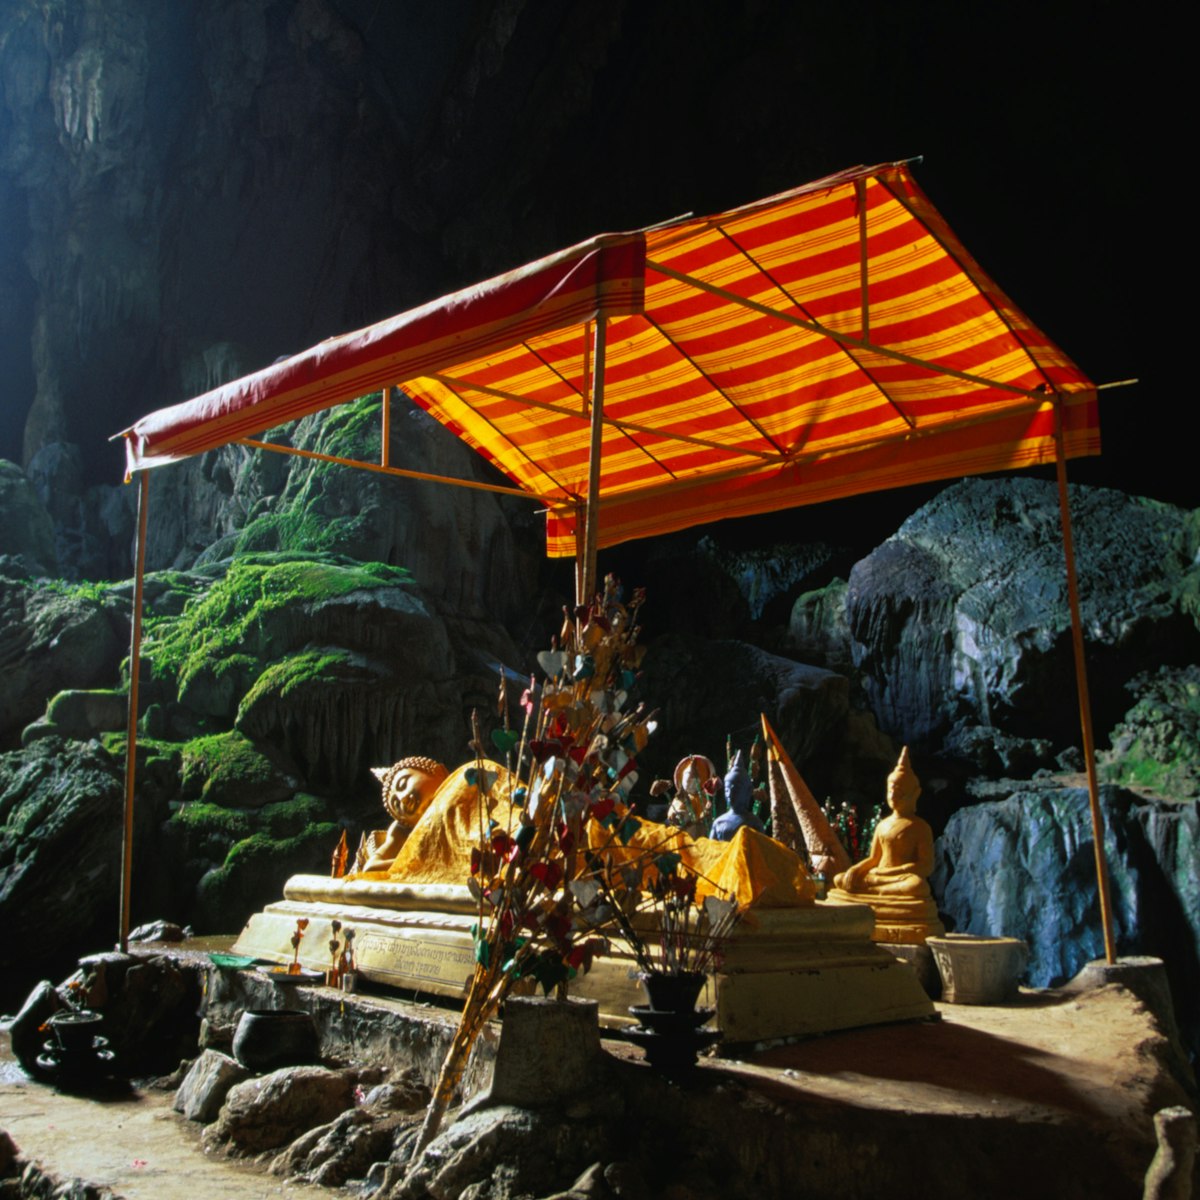 Tham Phu Kham cave, with the Thai bronze reclining Buddha in the distance, Vang Vieng